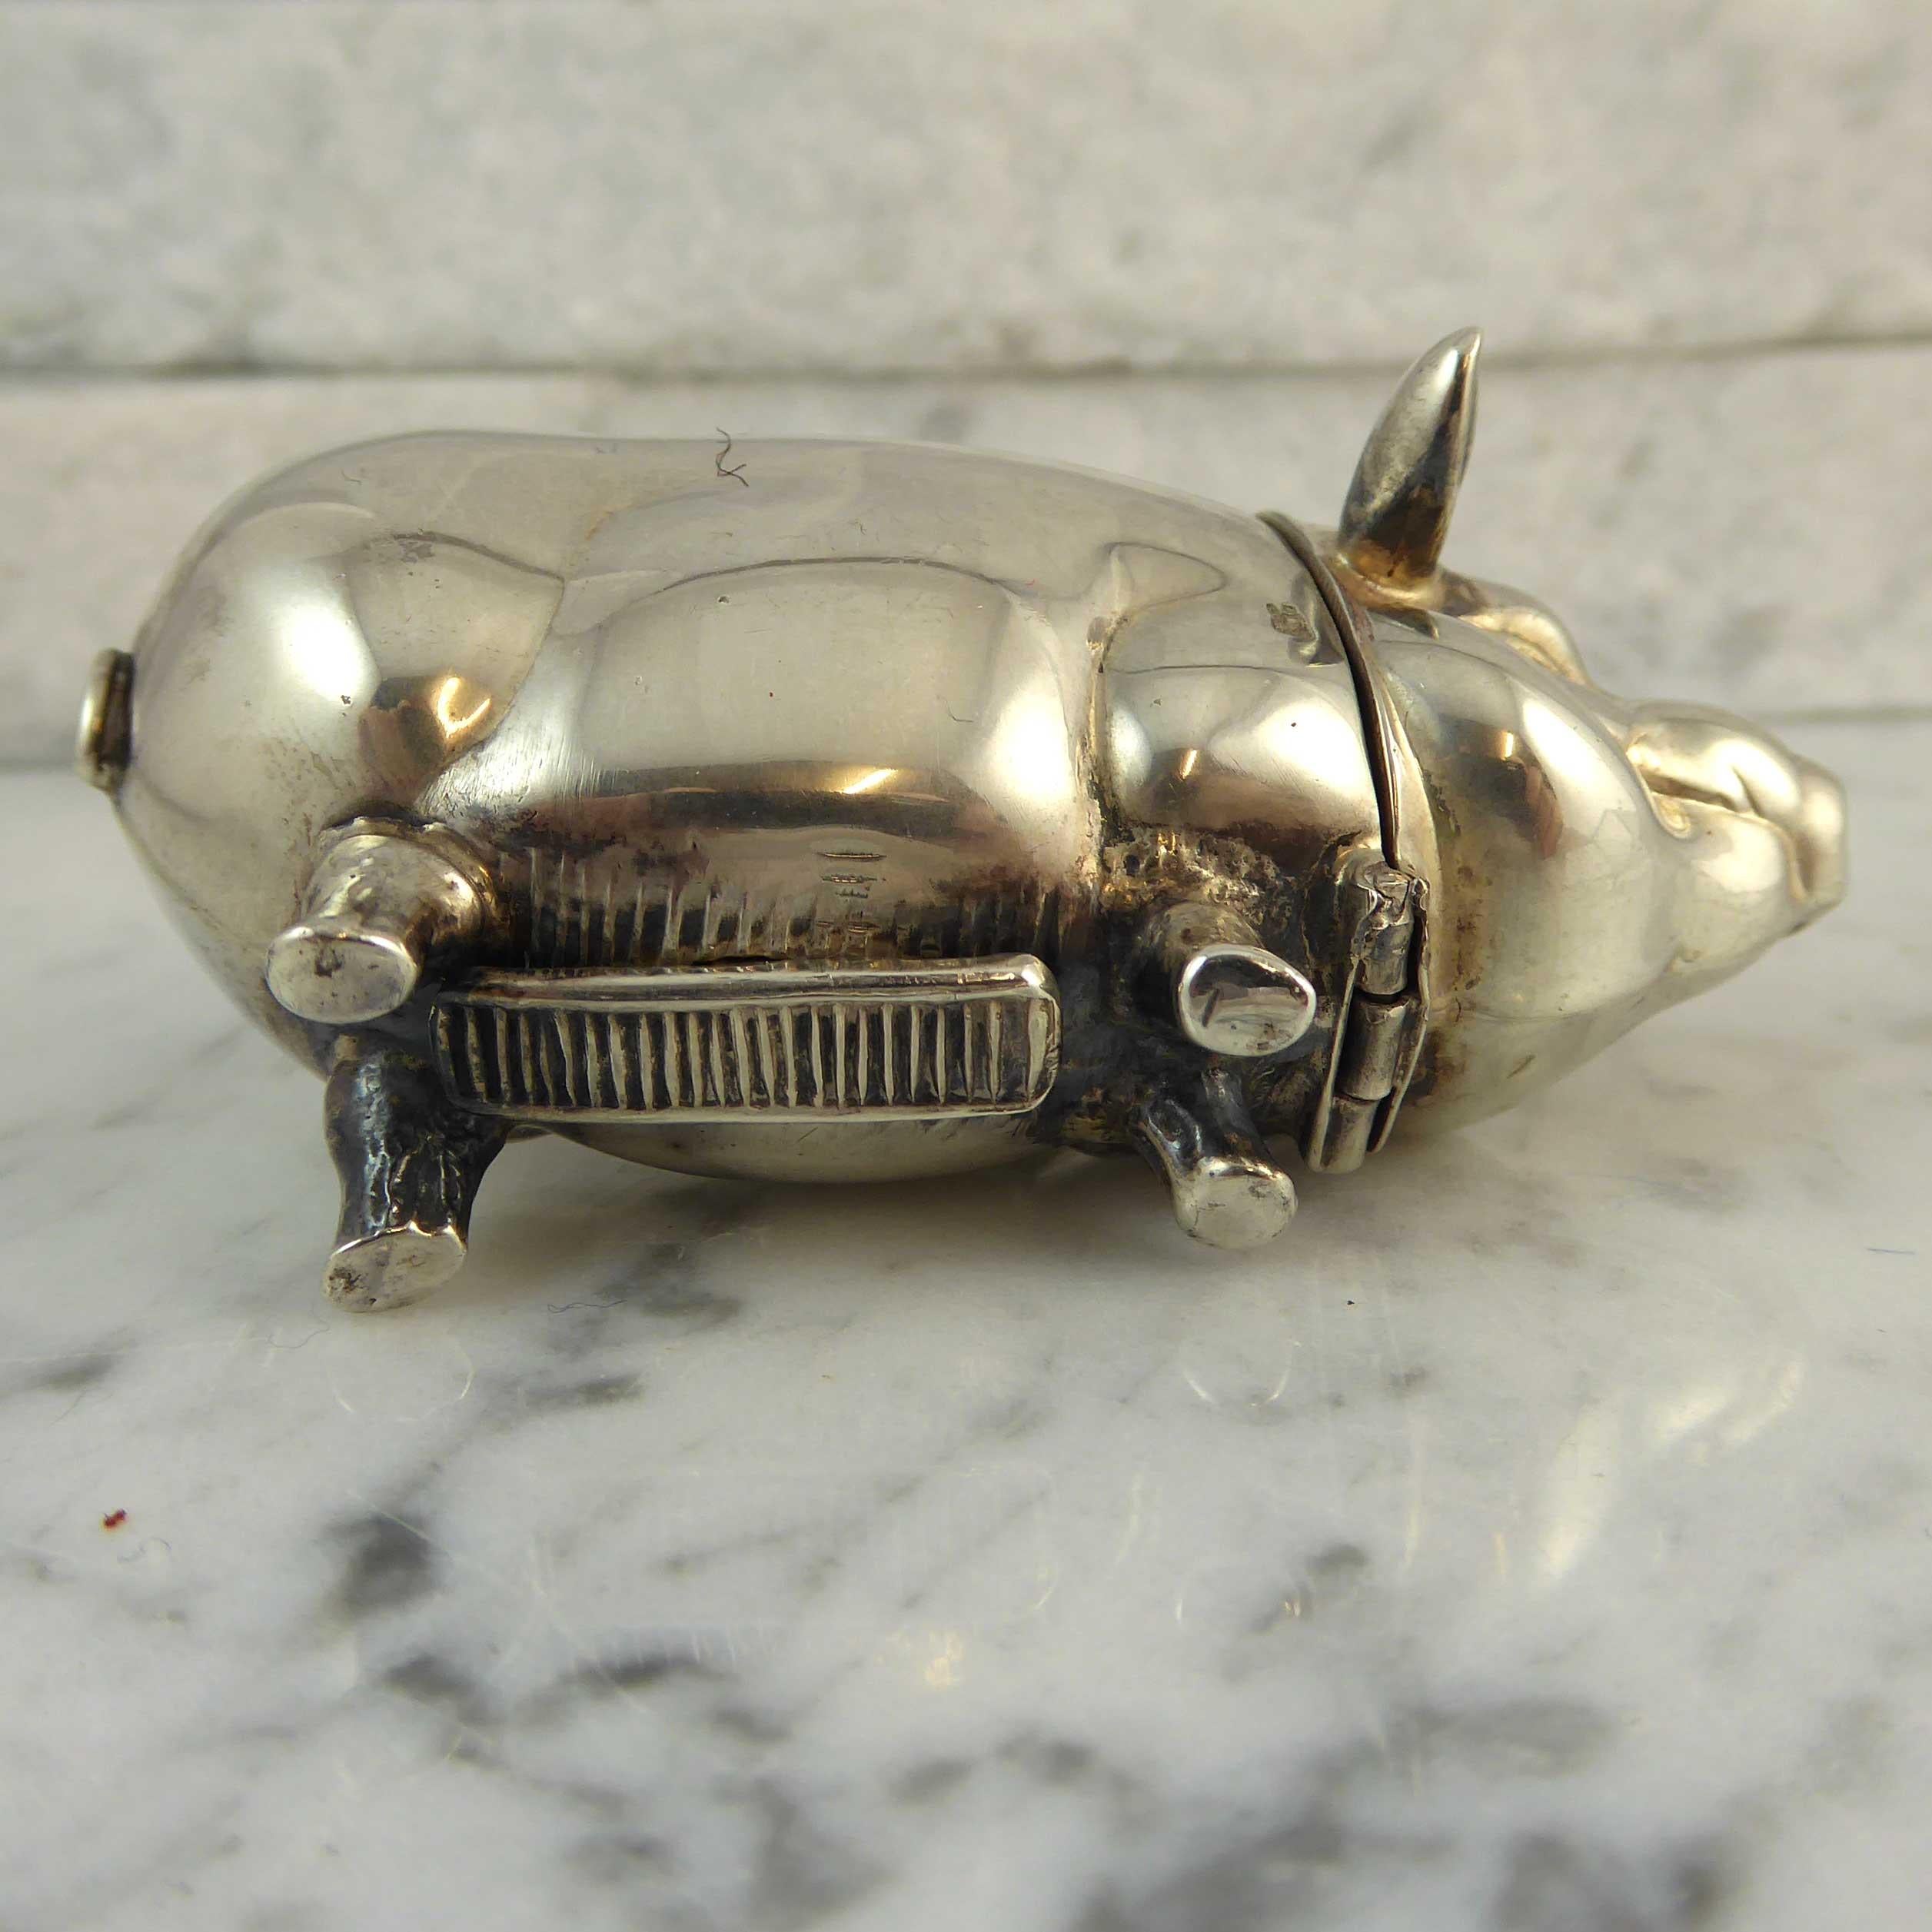 A recent, circa 2000, silver matchbox in the shape of a pig.  The head is hinged and falls forward to reveal a cavity for keeping matches.  The underside of the pig has a serrated section against which matches may be struck.  He has a lovely tactile